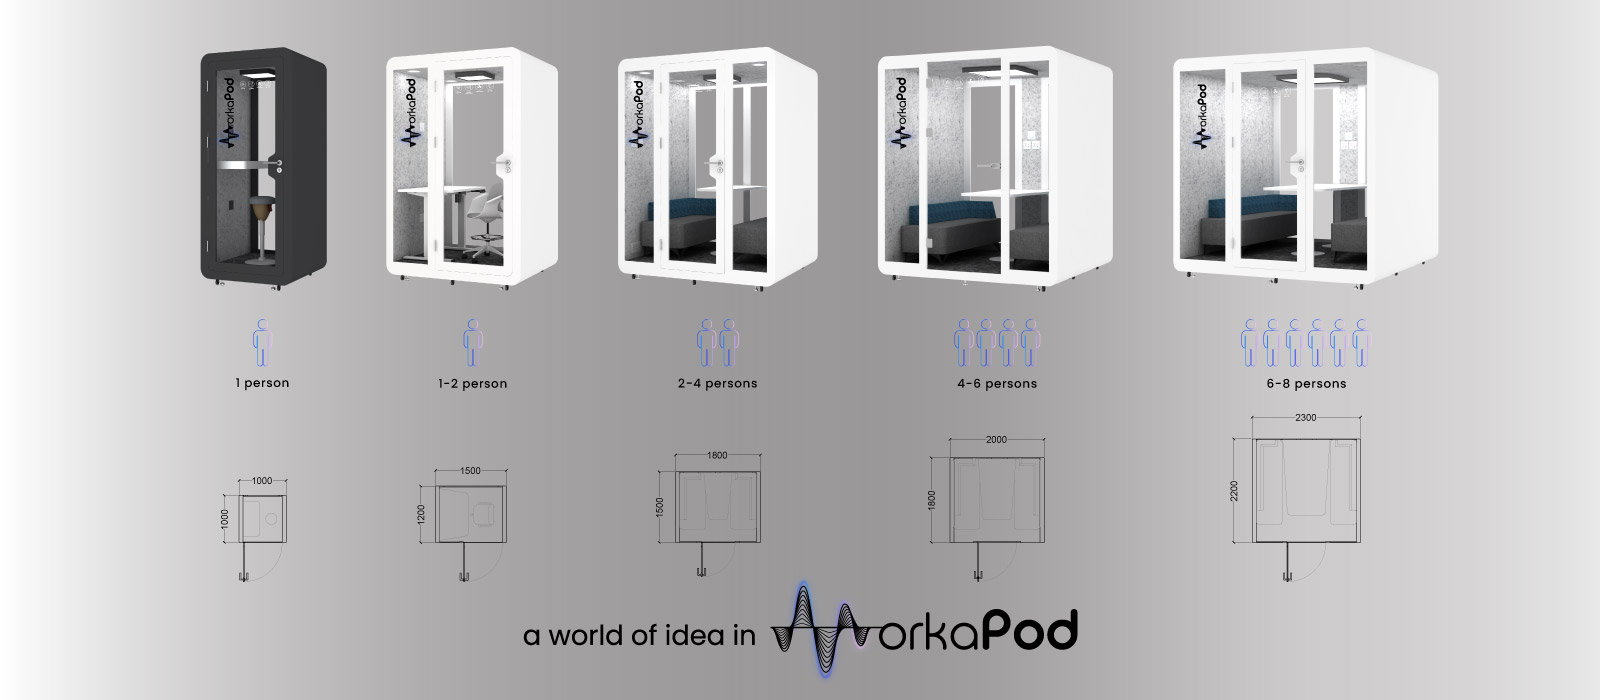 WorkaPod-acoustic-phone-booth-pod-for-private-phone-call,-meeting-interview-space-and-focus-work-size-layout